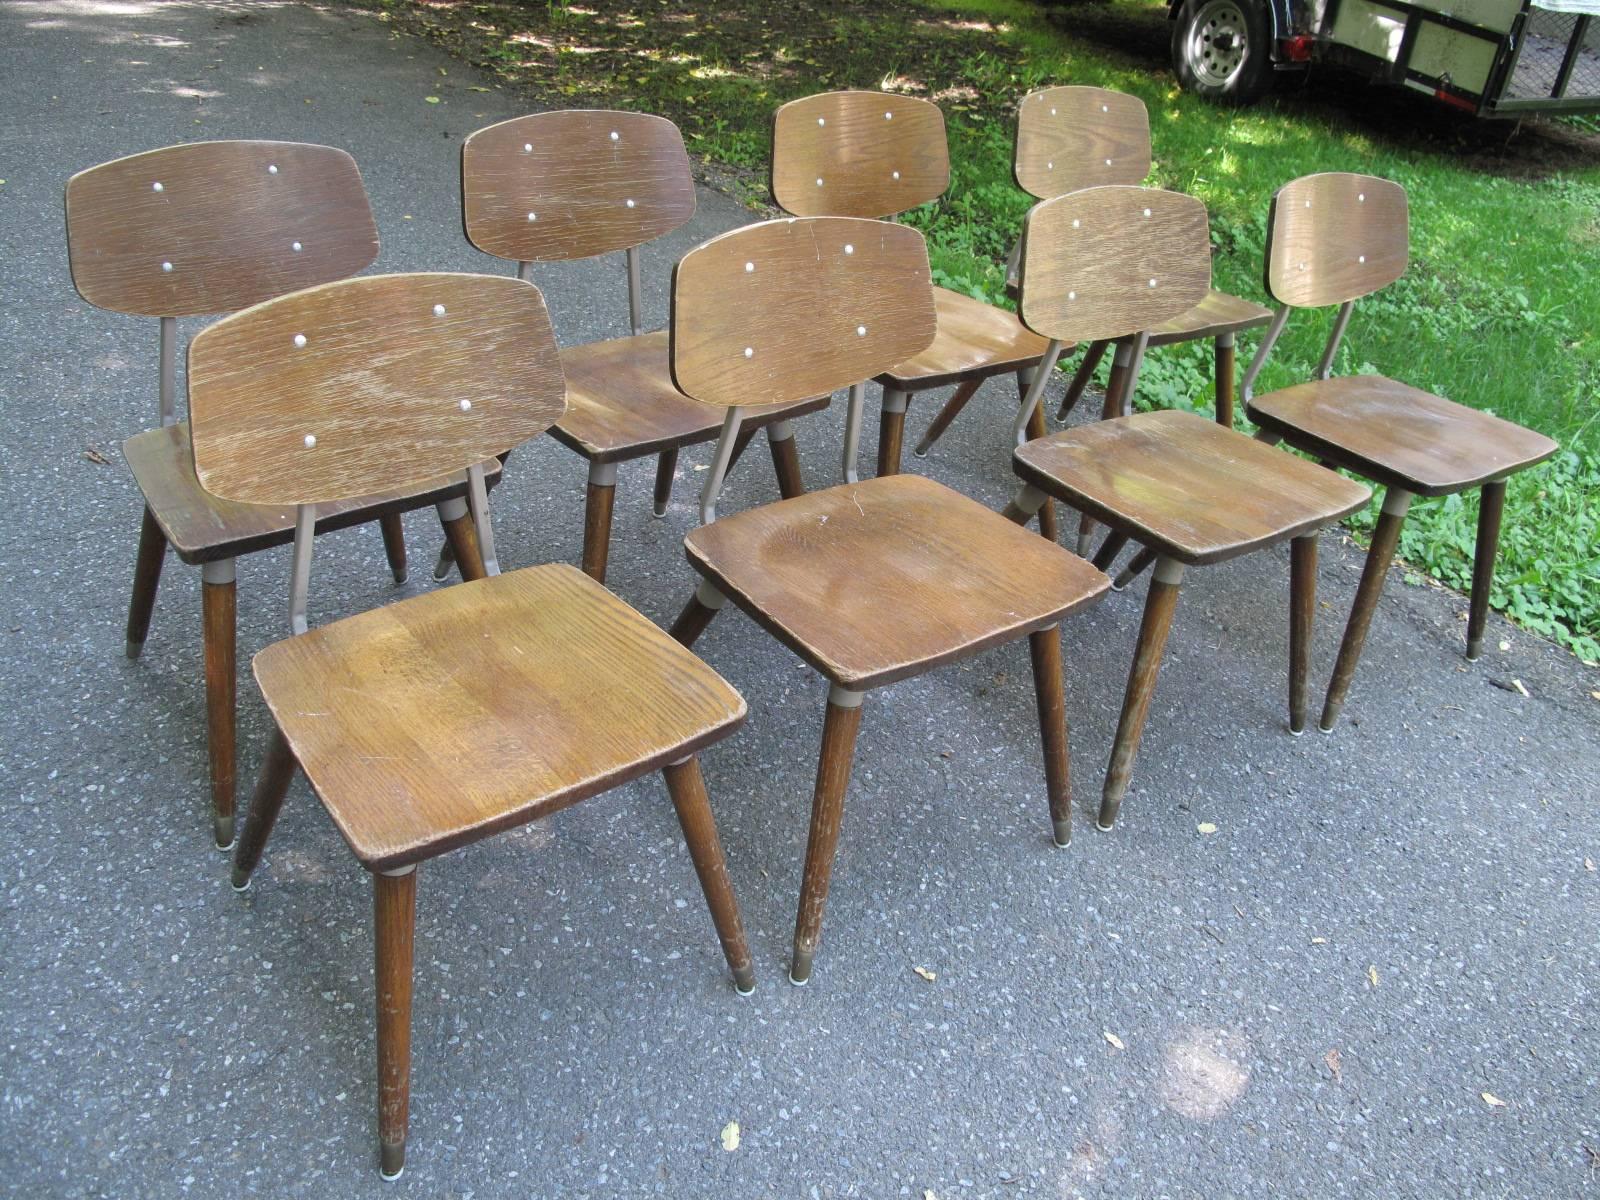 Set of seven Mid-Century Modern chairs, designed by French-American Industrial designer Raymond Loewy in the 1950s. Original Hill-Rom label from Batesville, Indiana along with the US patent number.